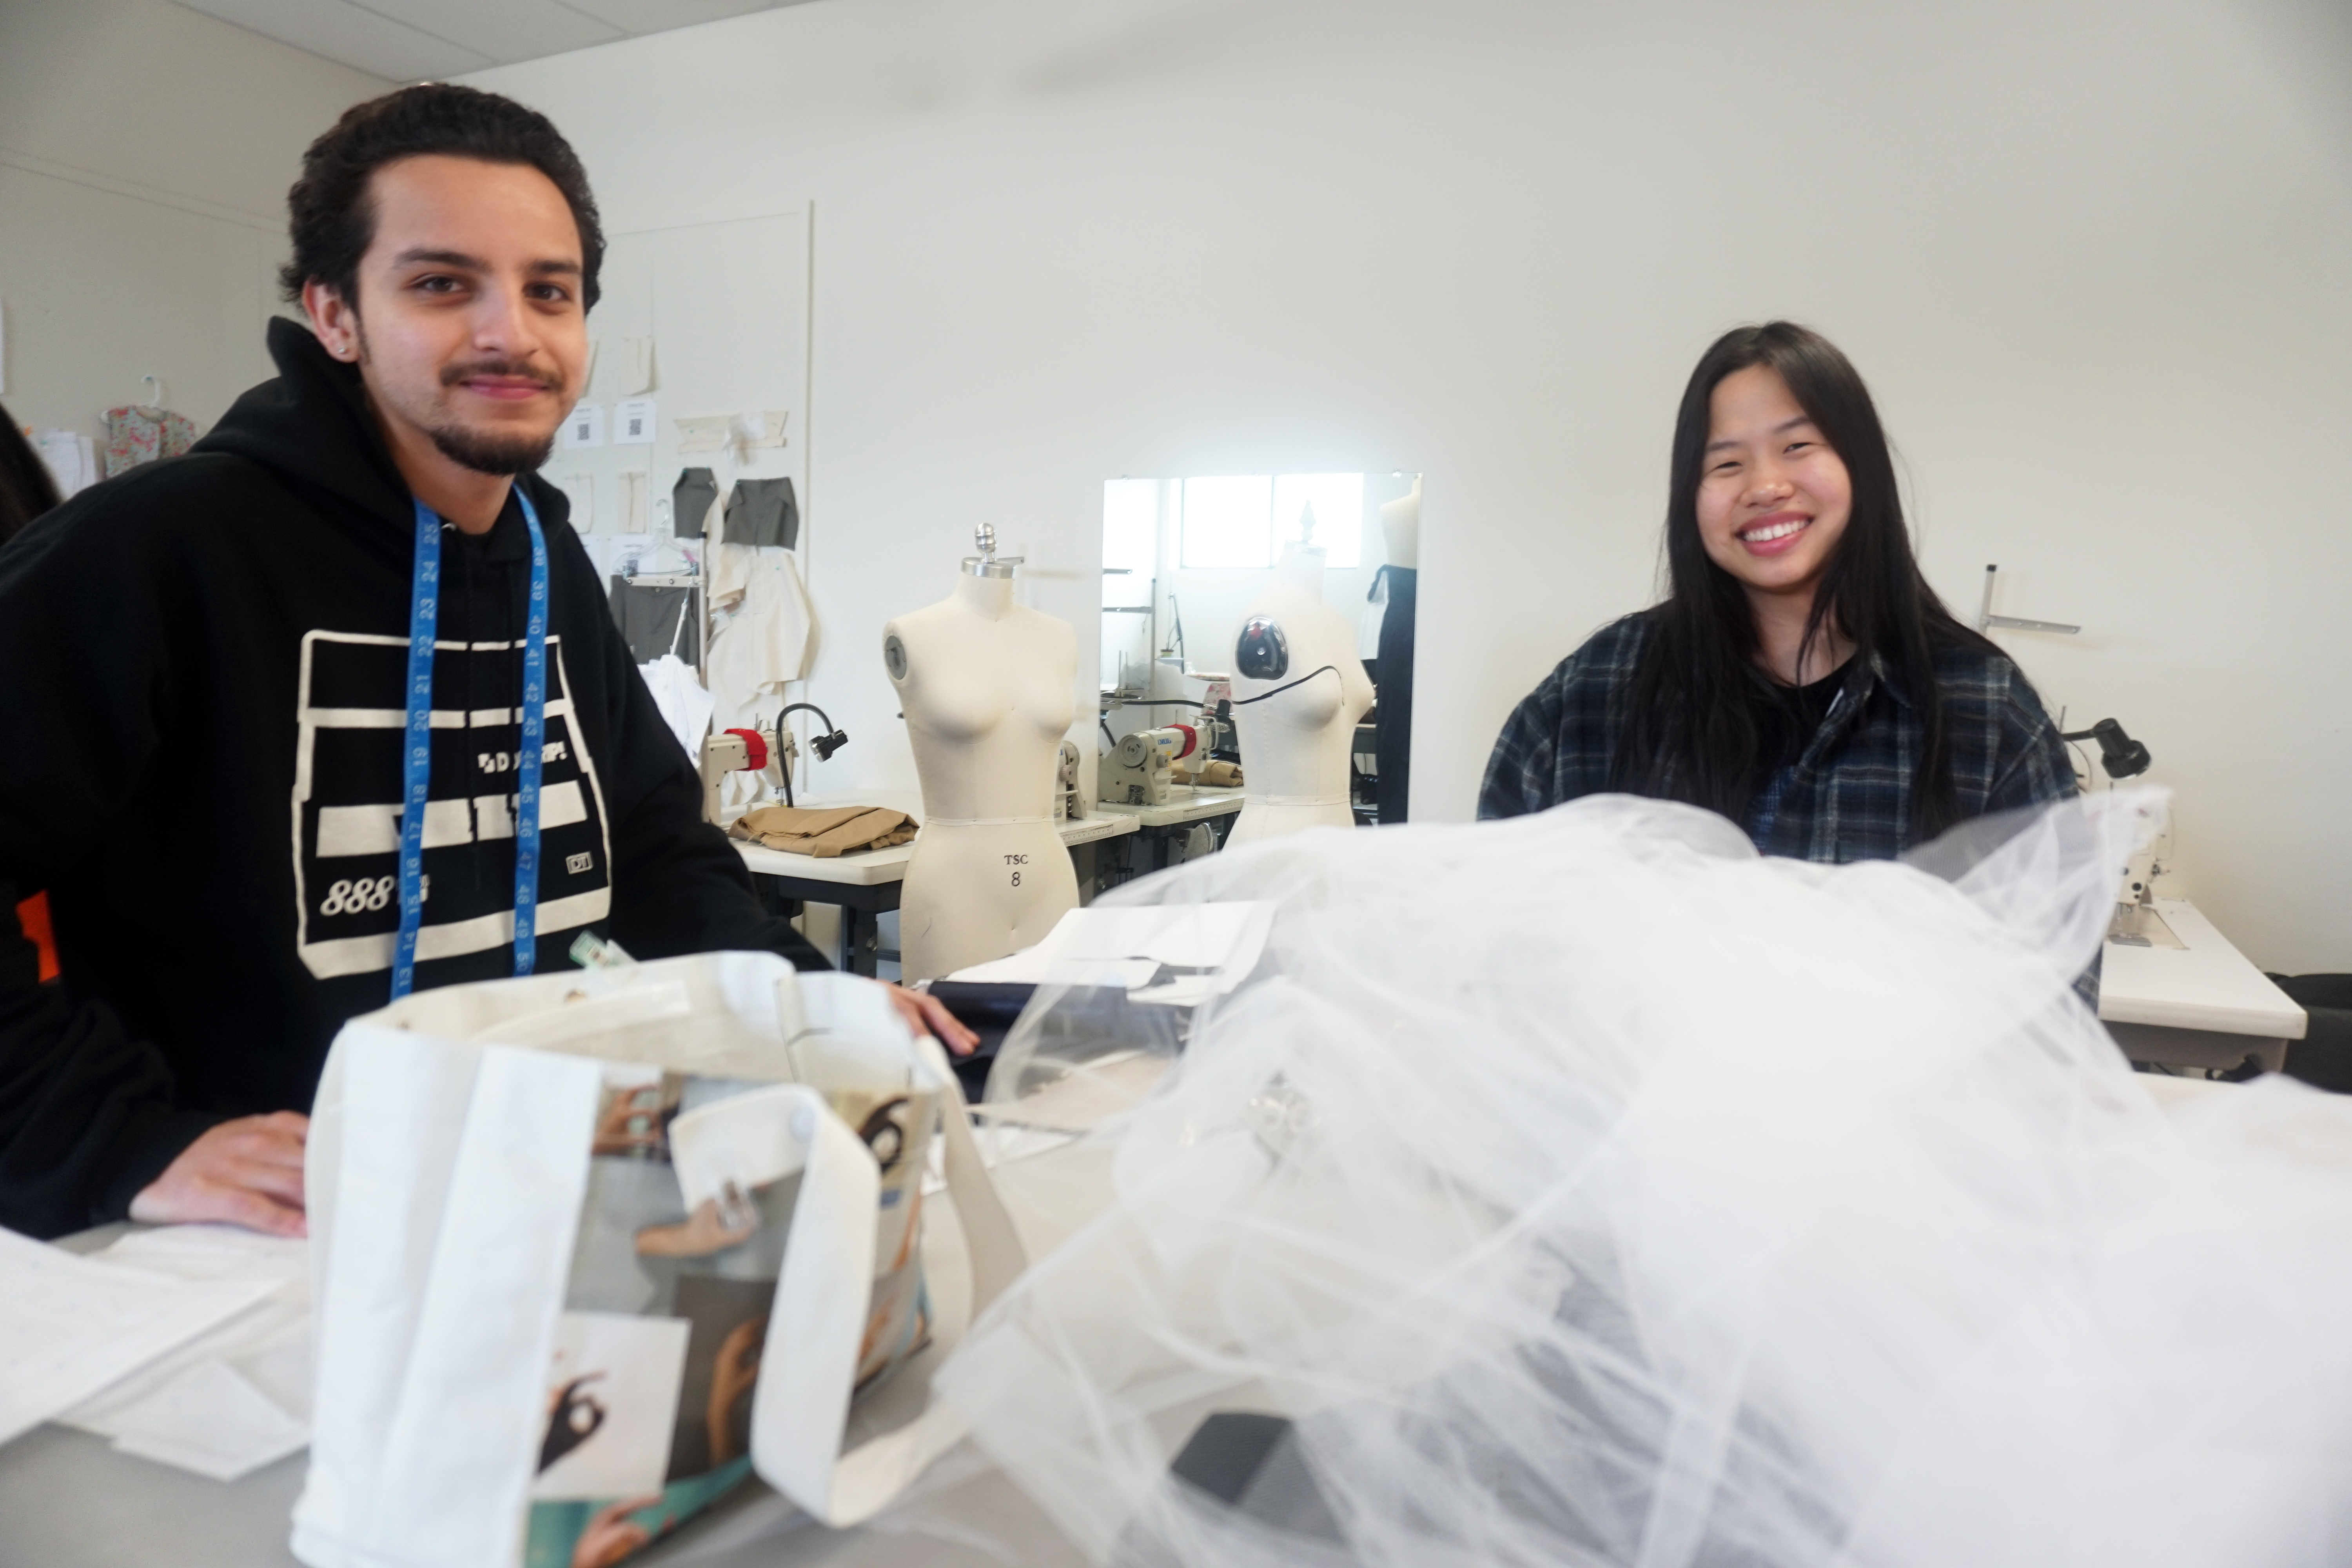 ̳ Fashion Design majors received a grant to research sustainable fashion.